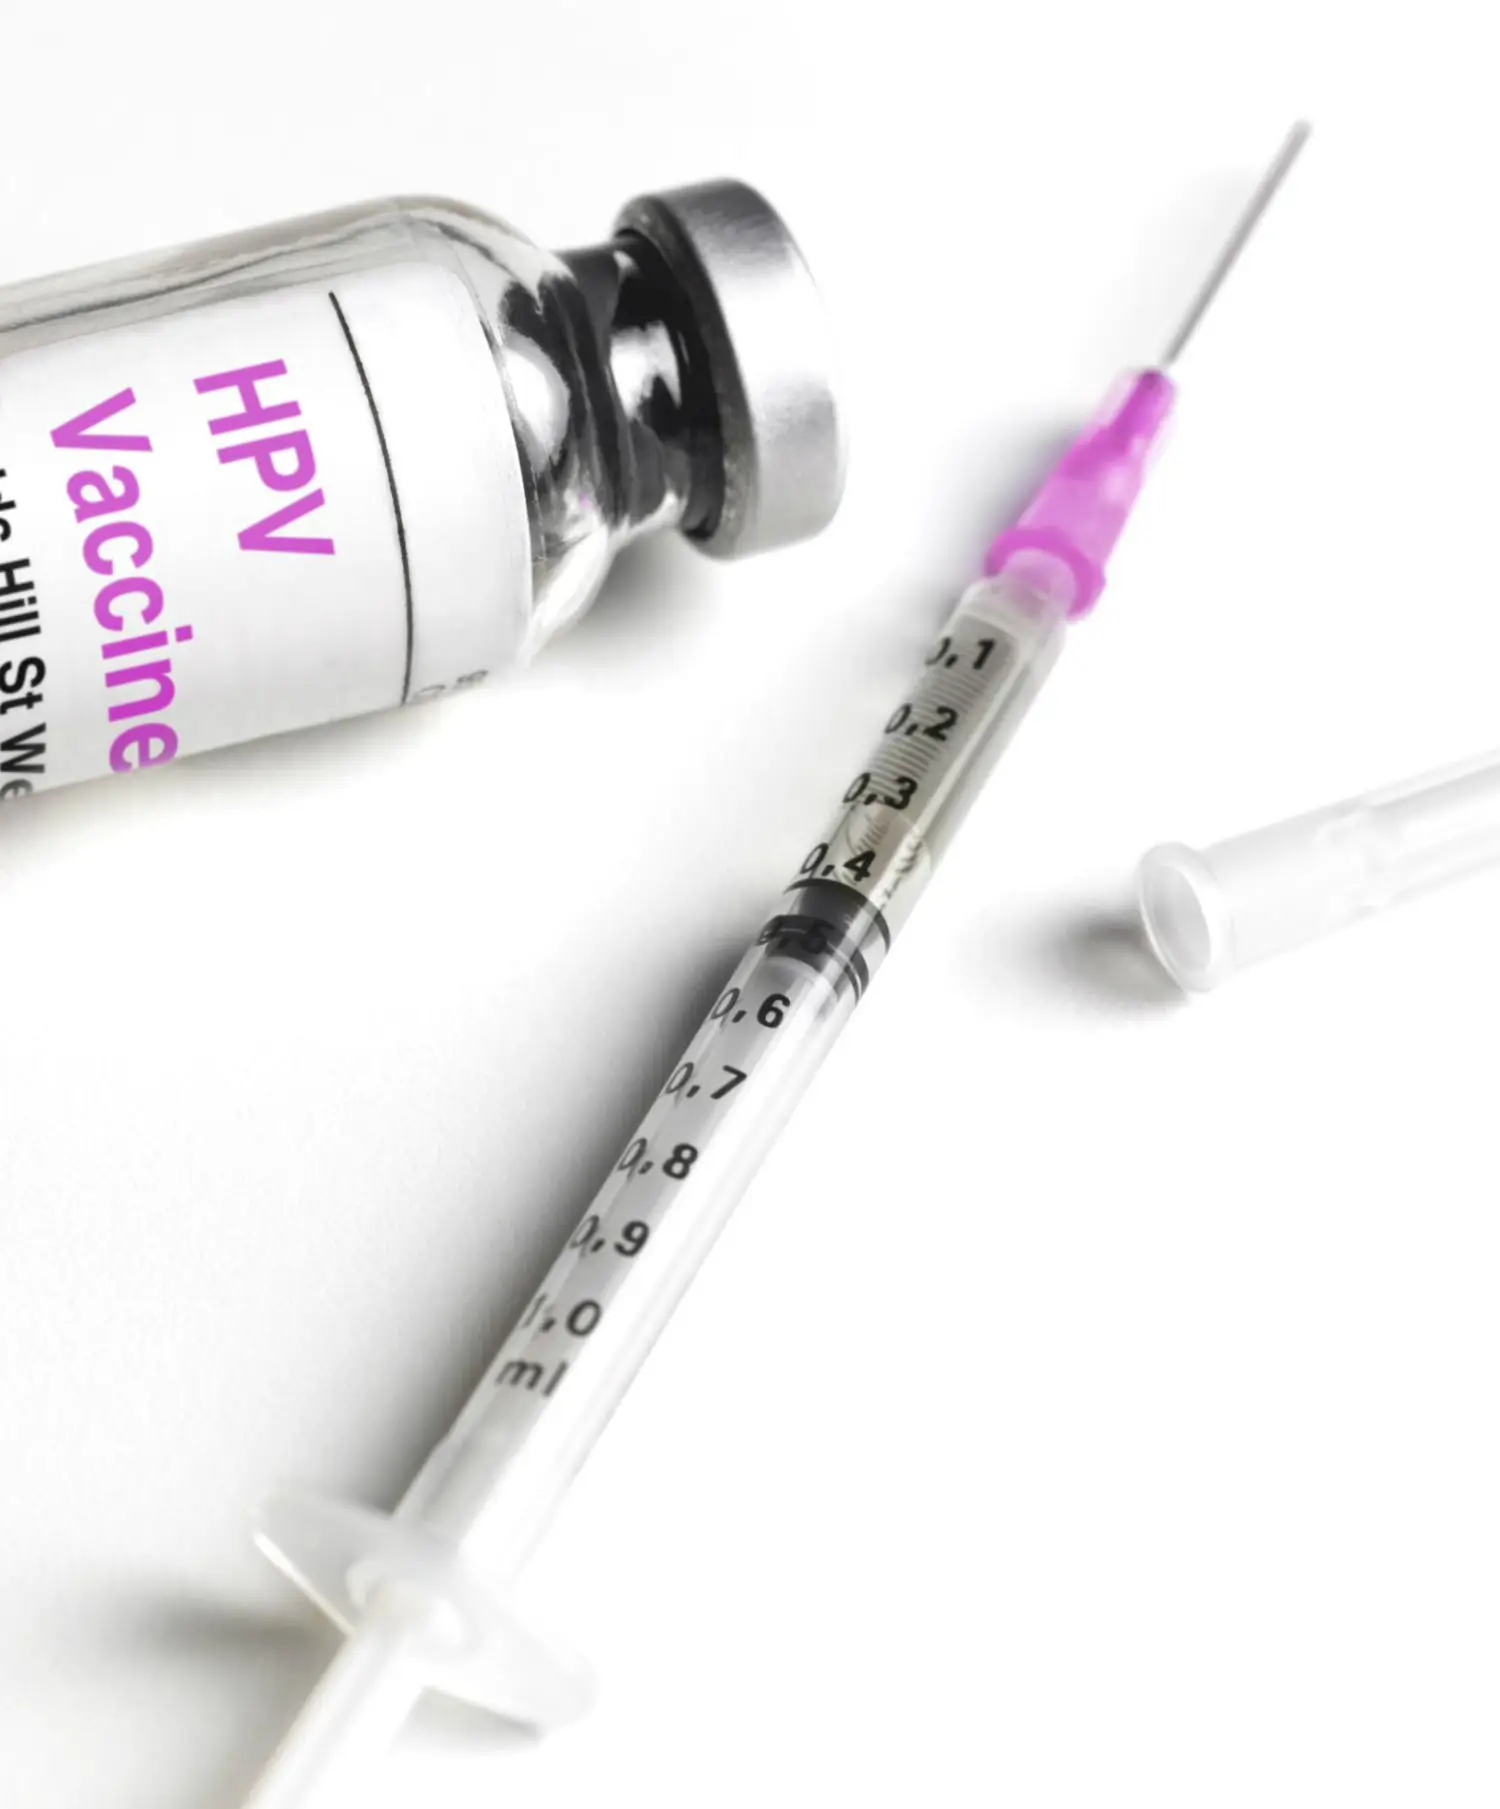 Cost of the HPV vaccine without insurance